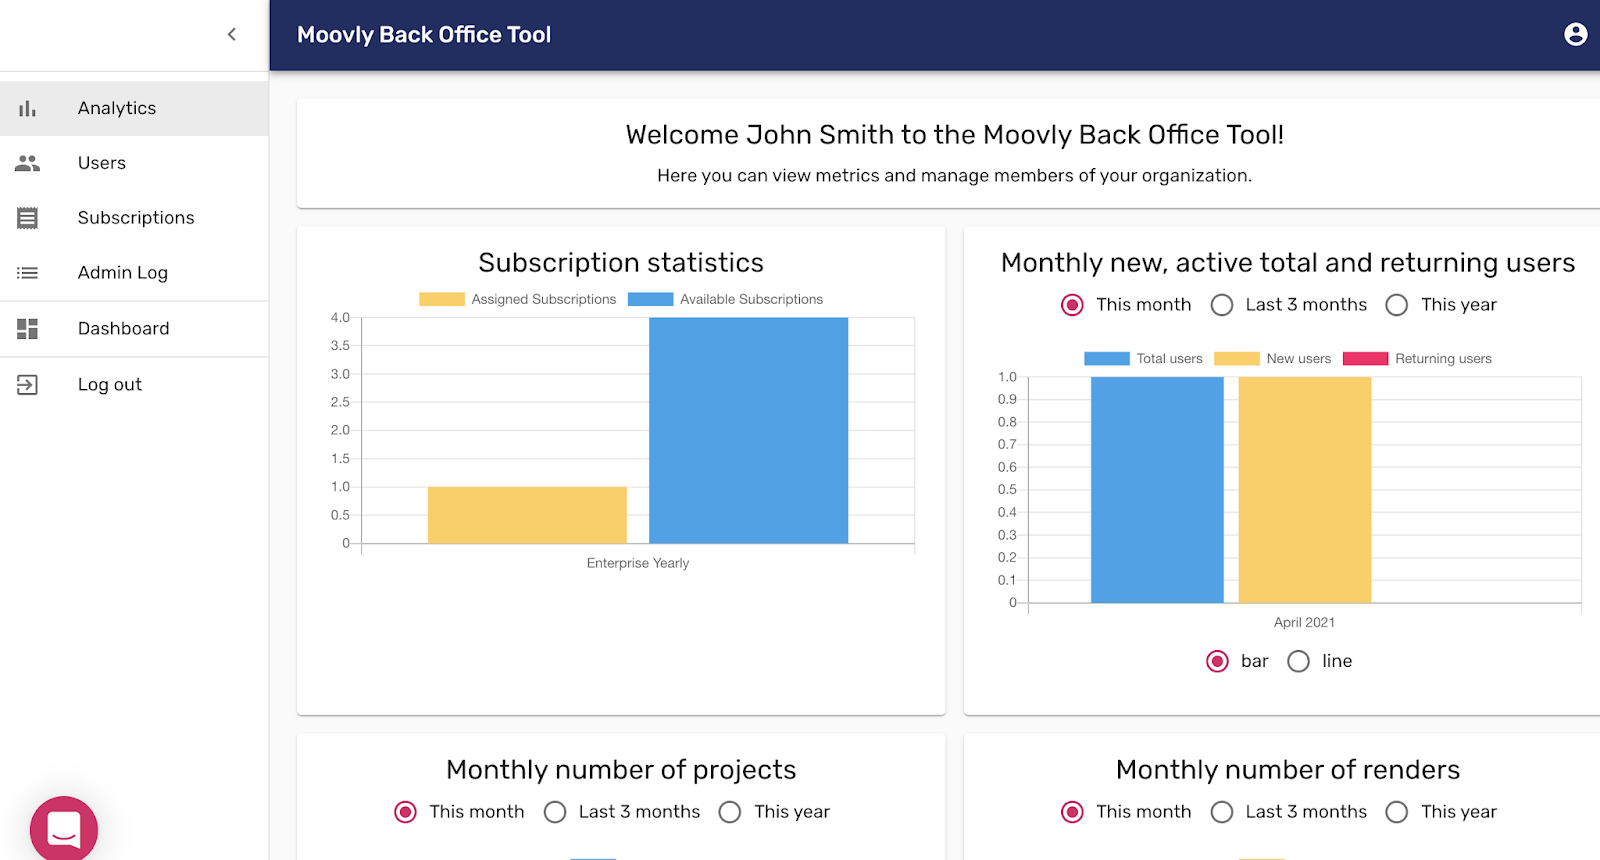 Analytics in Moovly’s back-office tool